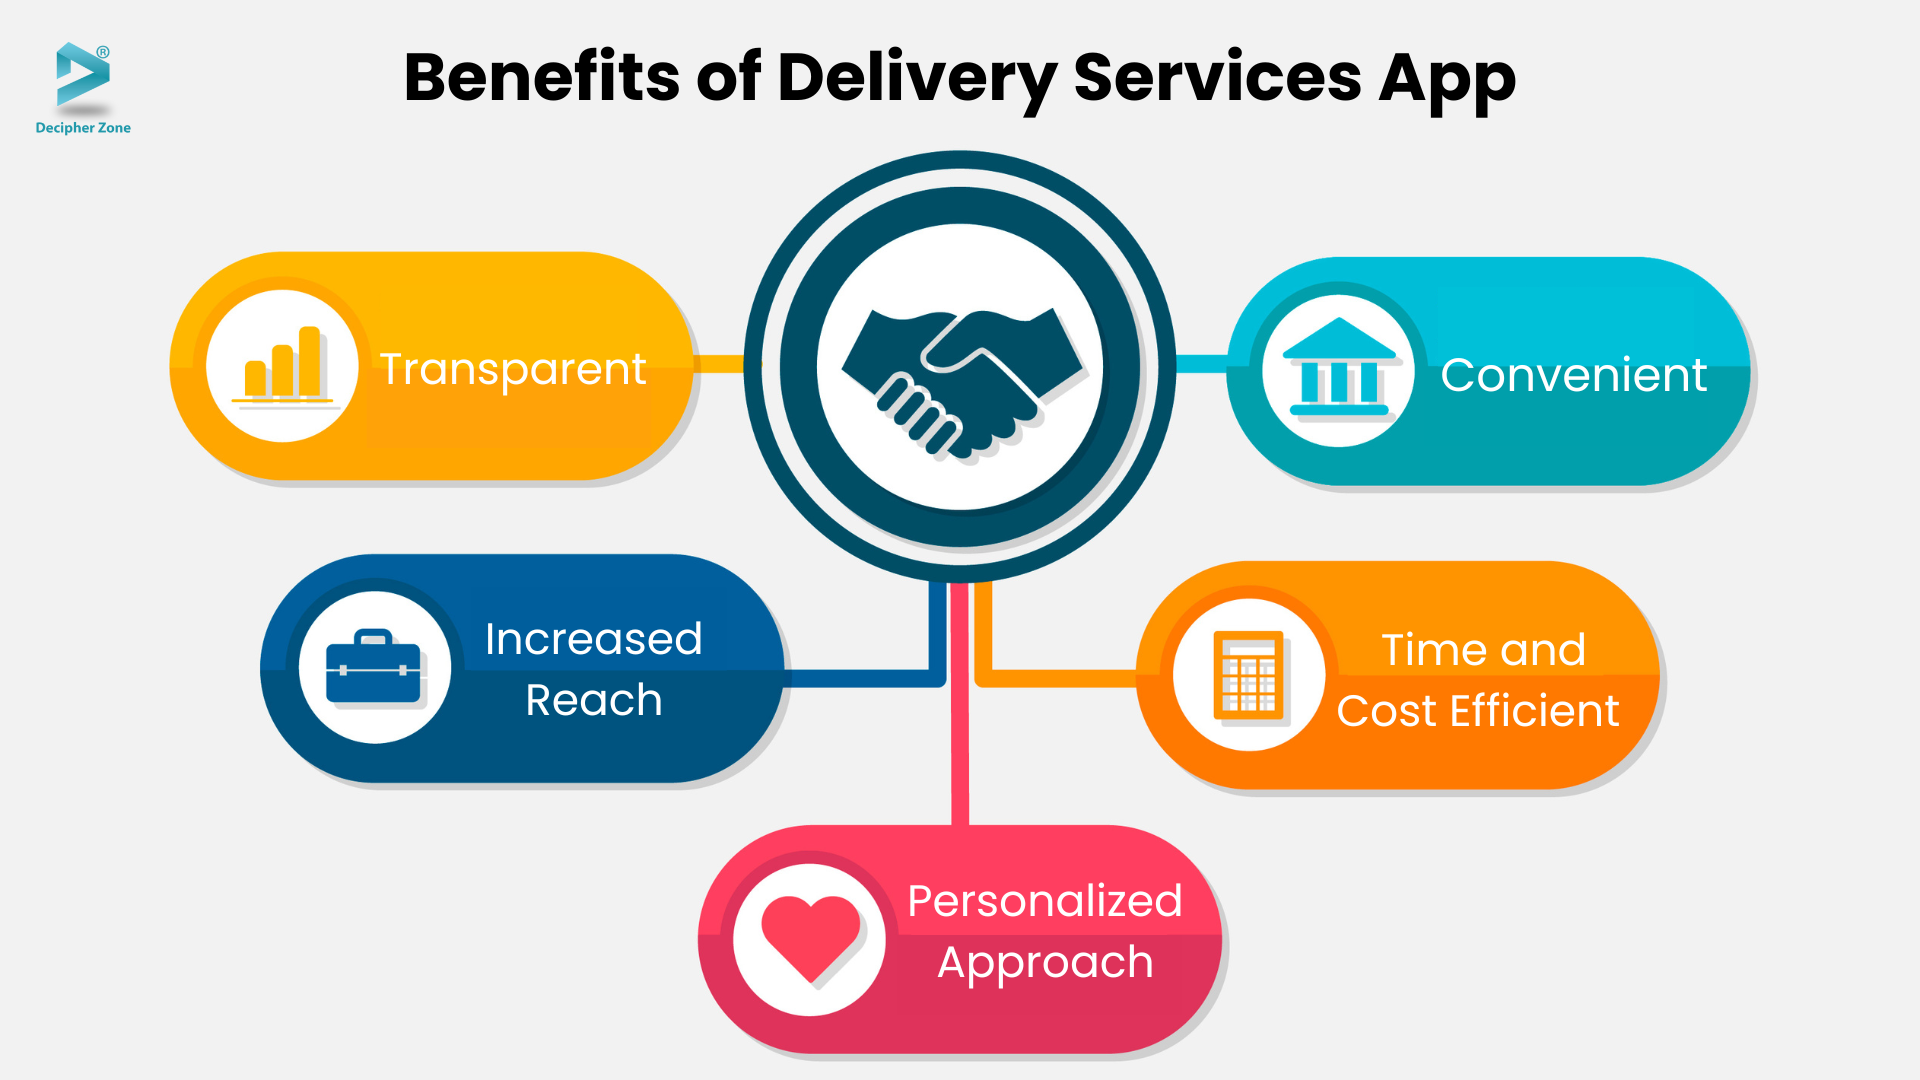 Why Develop A Delivery Services App for Your Business?